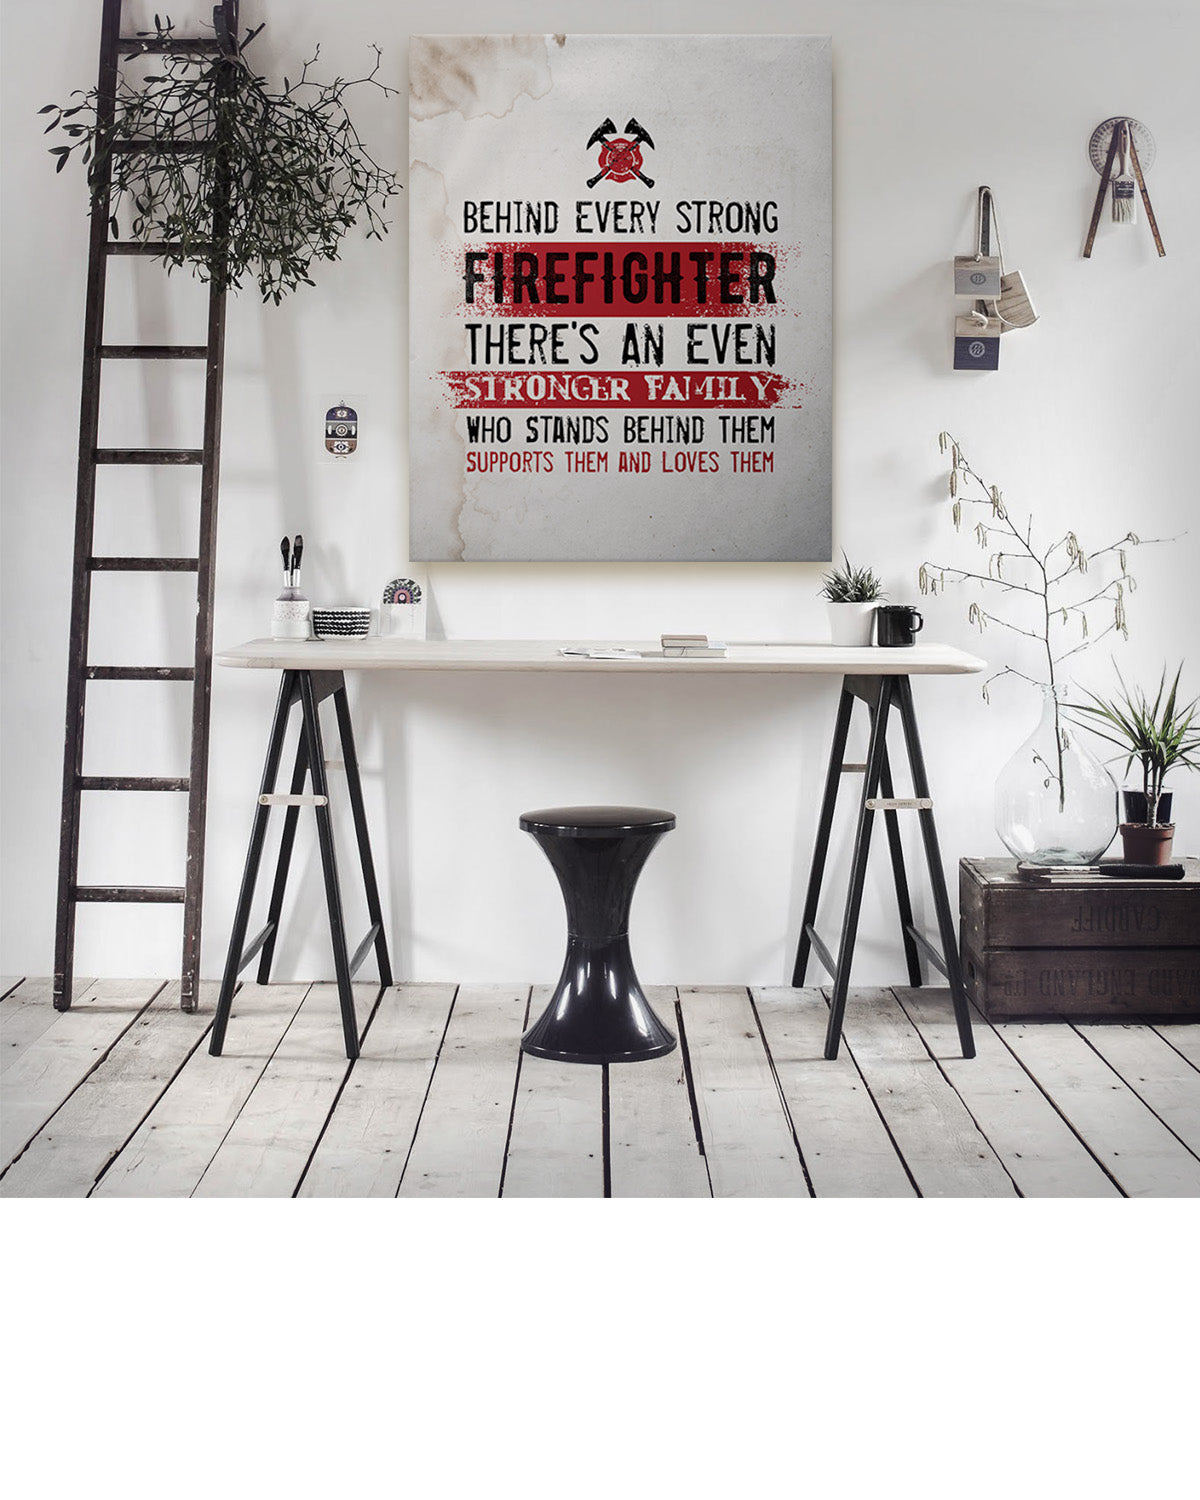 Firefighter Motivational Posters, Prints or Canvas - Firefighter Gifts - First Responder Gifts - First Responder Decor Appreciation Decor - Gifts for Firemen or Women